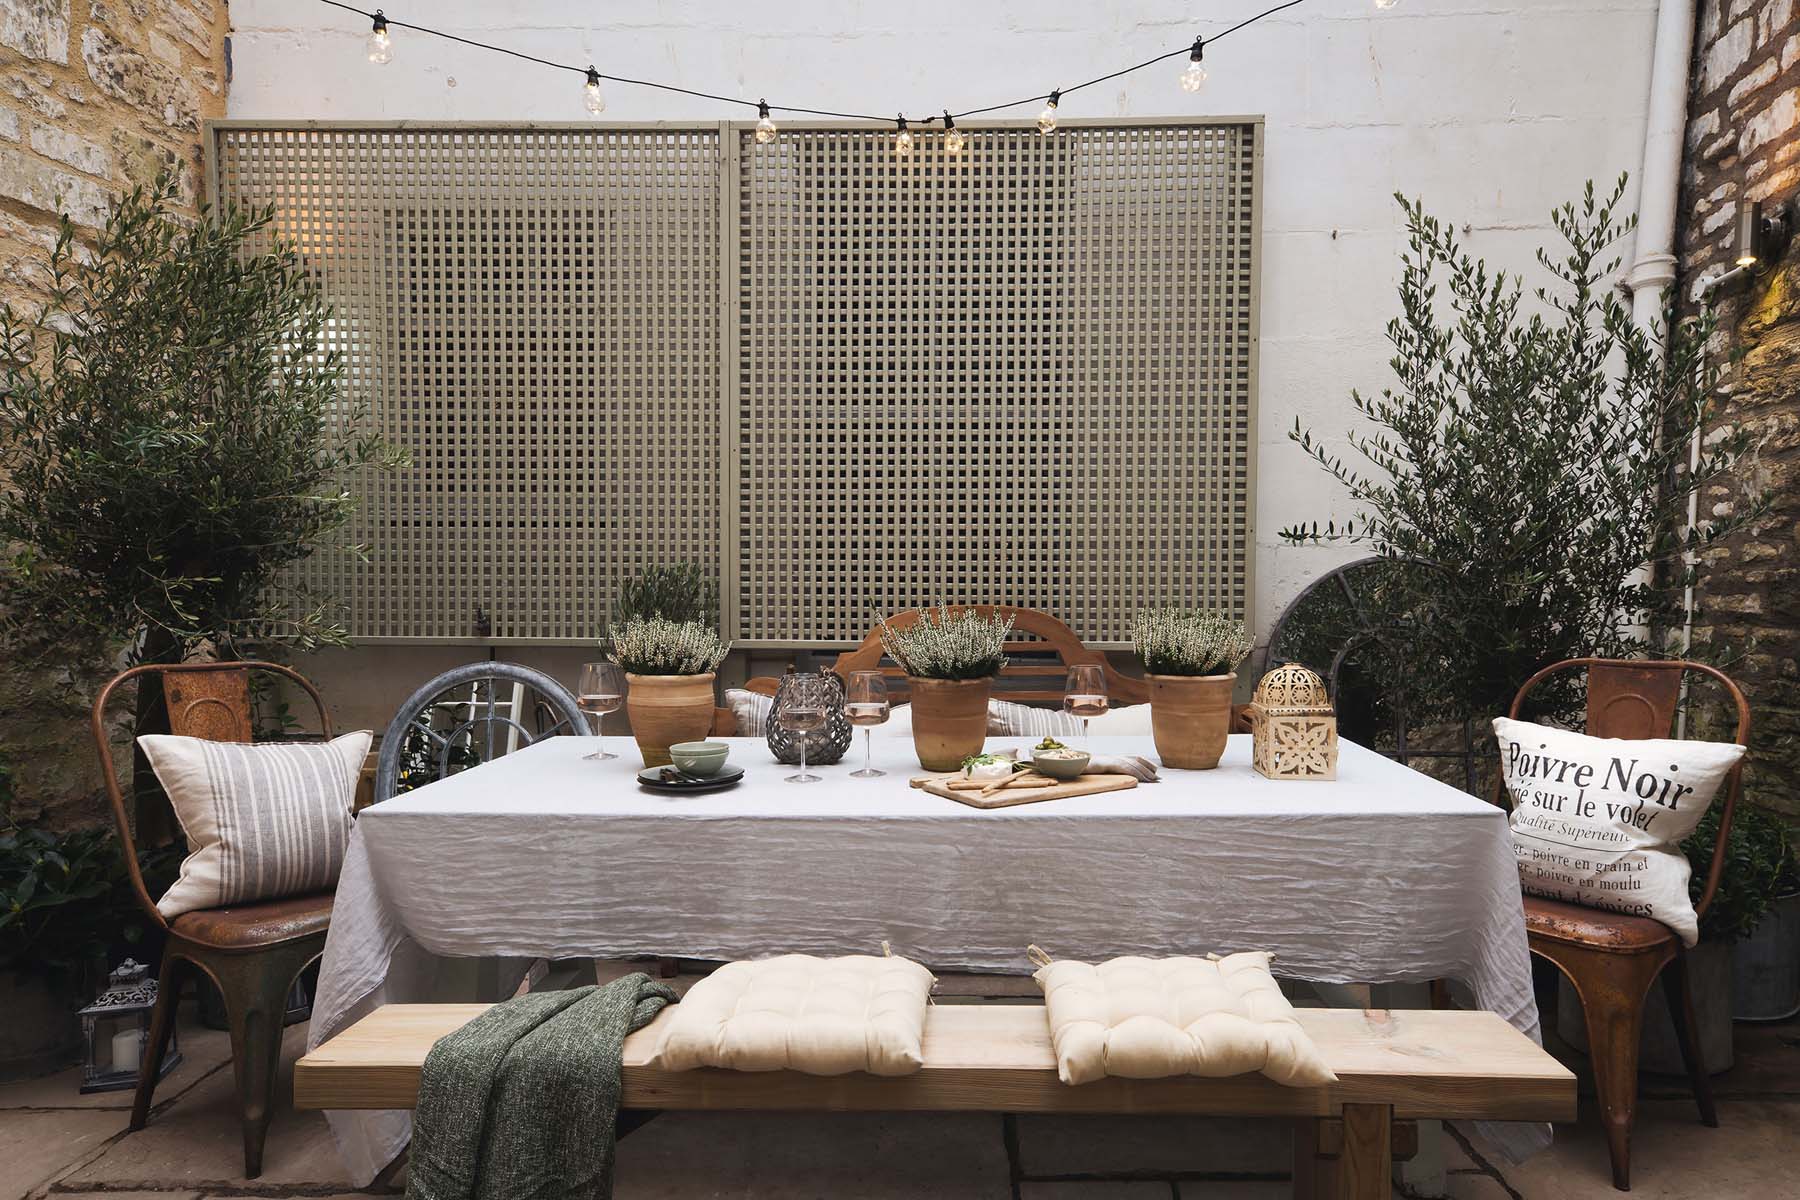 outdoor dining set up with cushions and olive trees